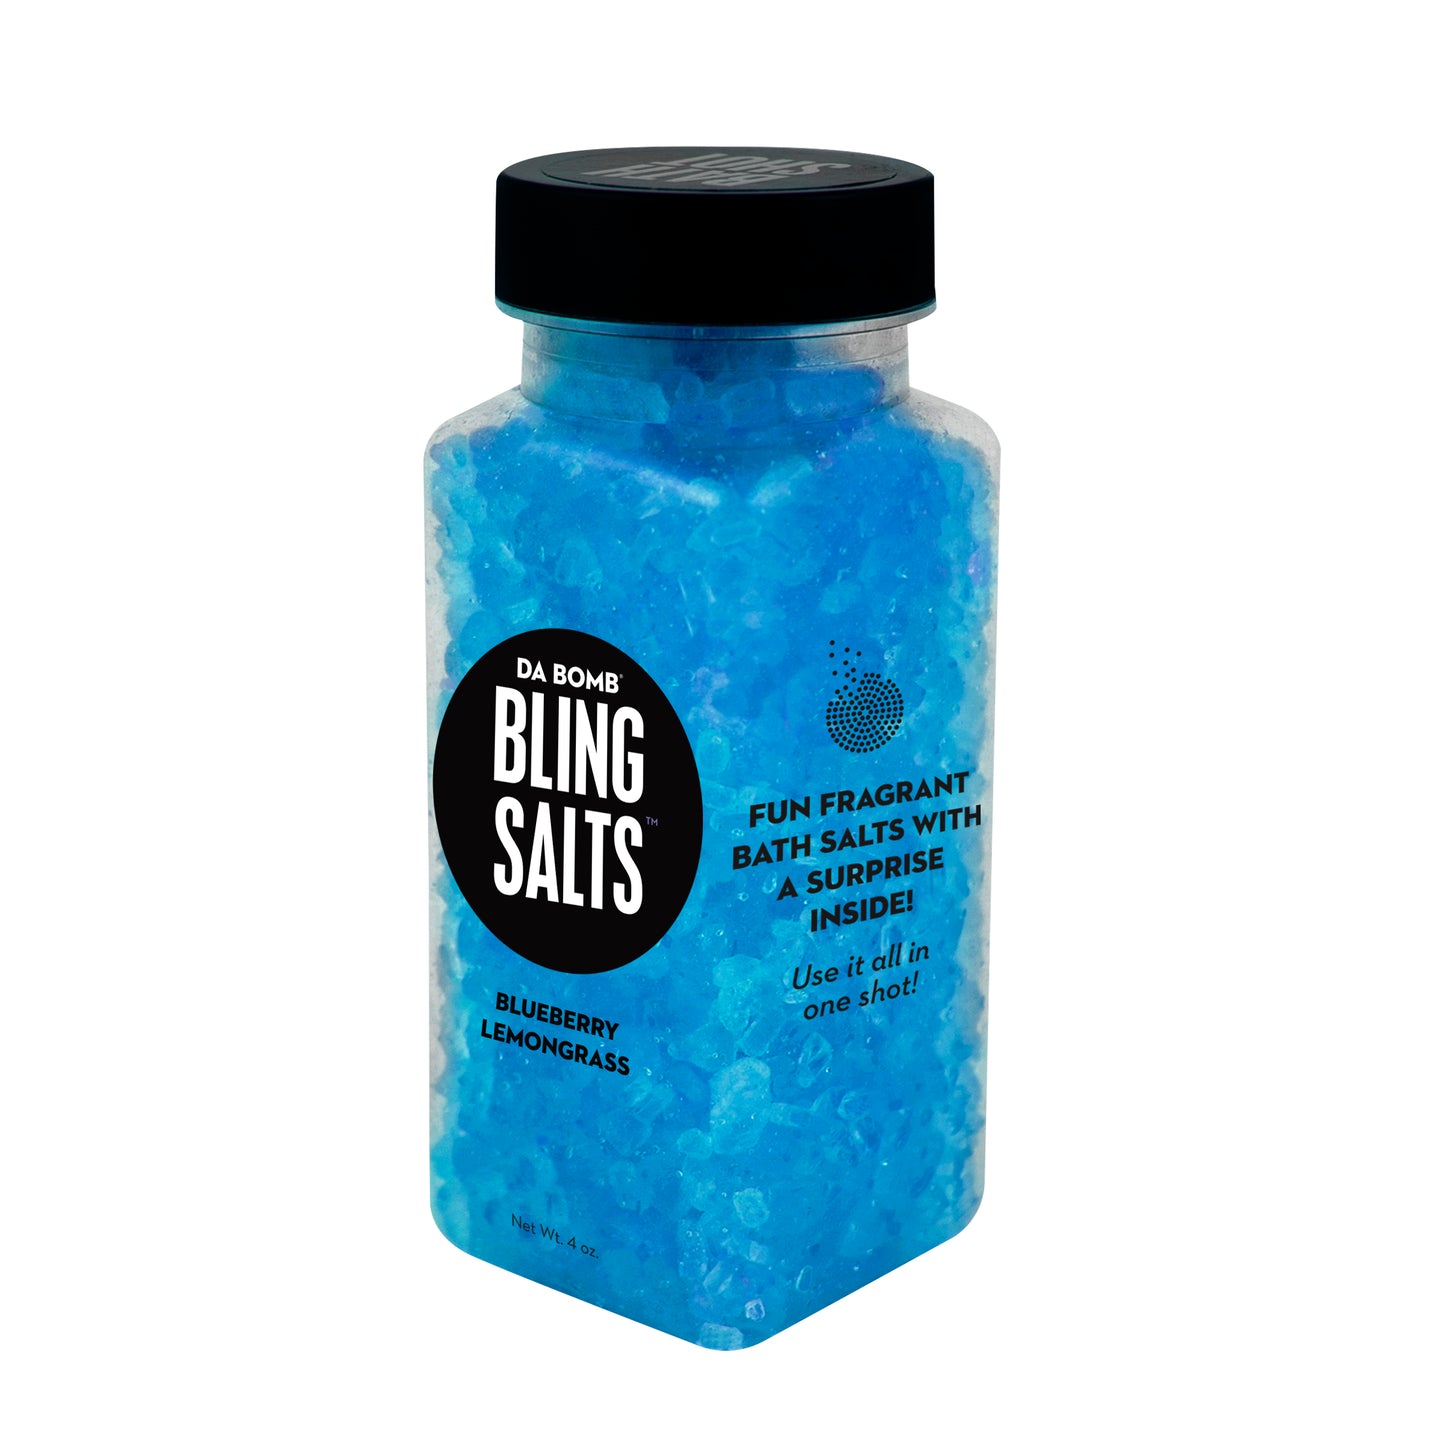 Small, clear plastic jar filled with blue bath salt that smells like Blueberry lemongrass. Each shot contains a fun surprise.